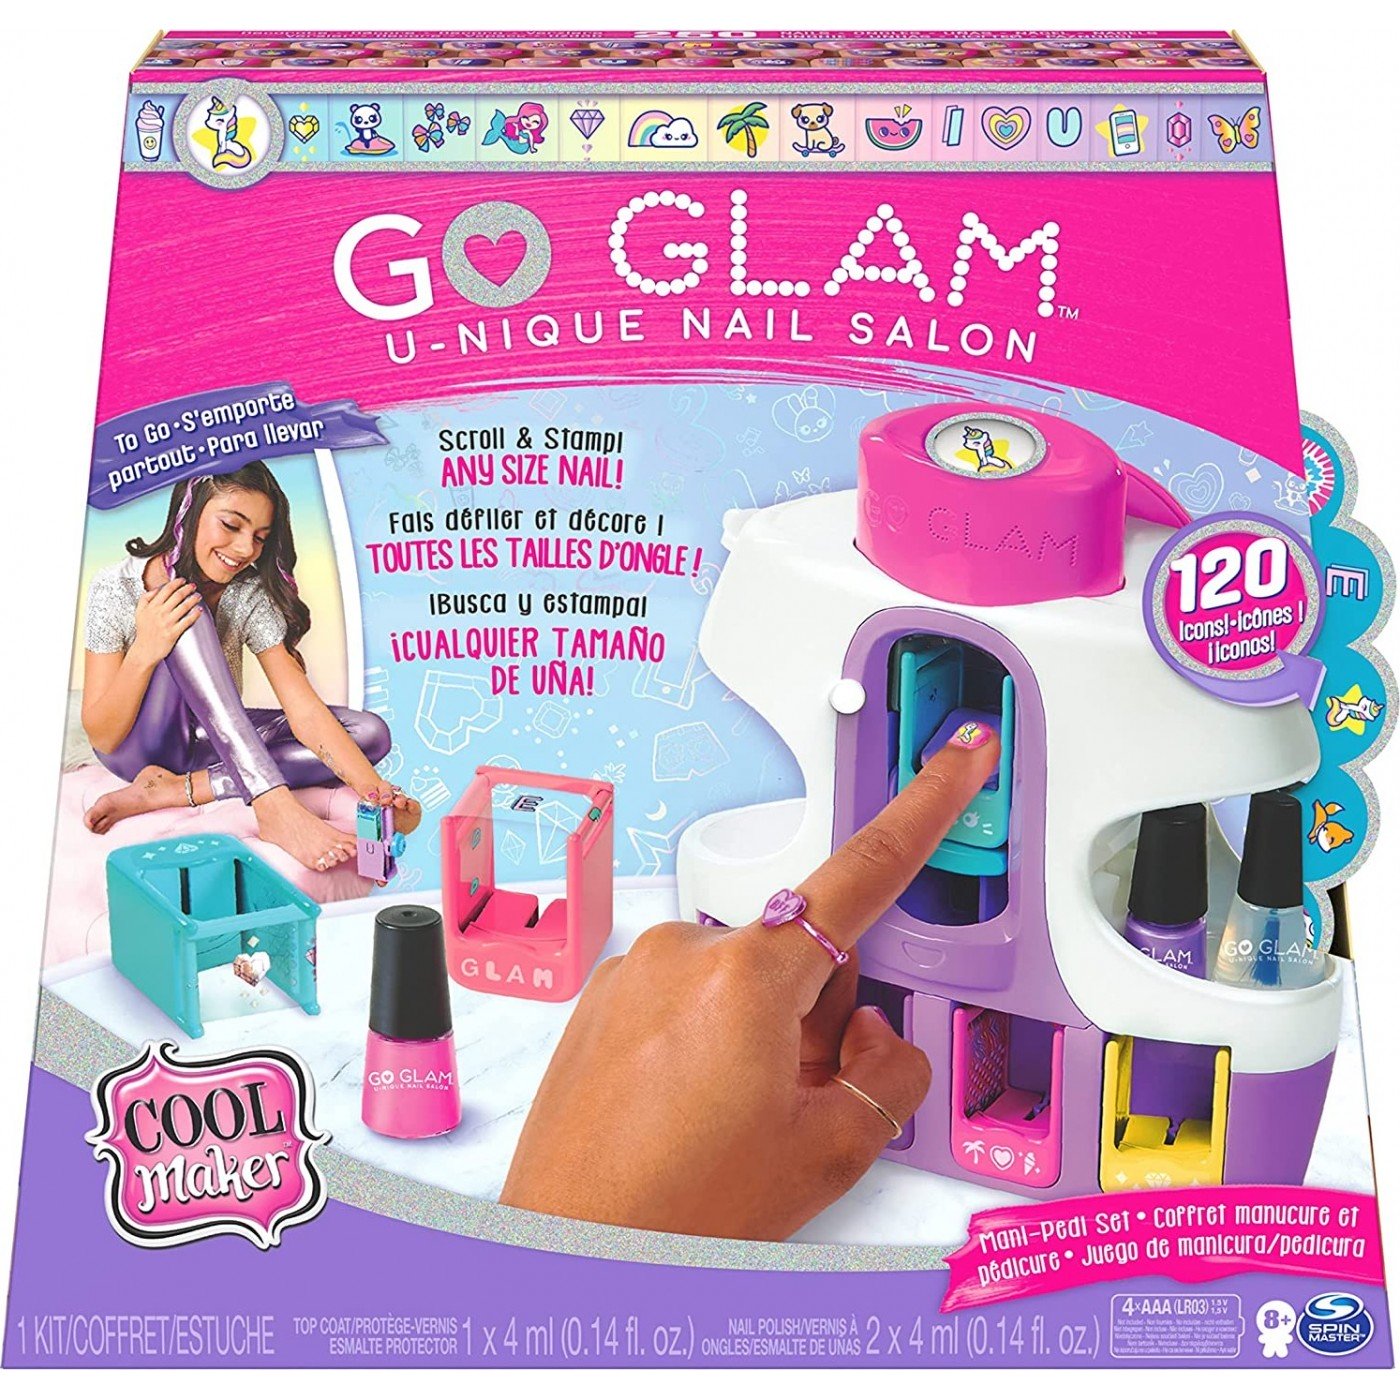 cool-maker-go-glam-u-nique-nail-salon-with-portable-stamper-5-design-pods-and-dryer-nail-kit